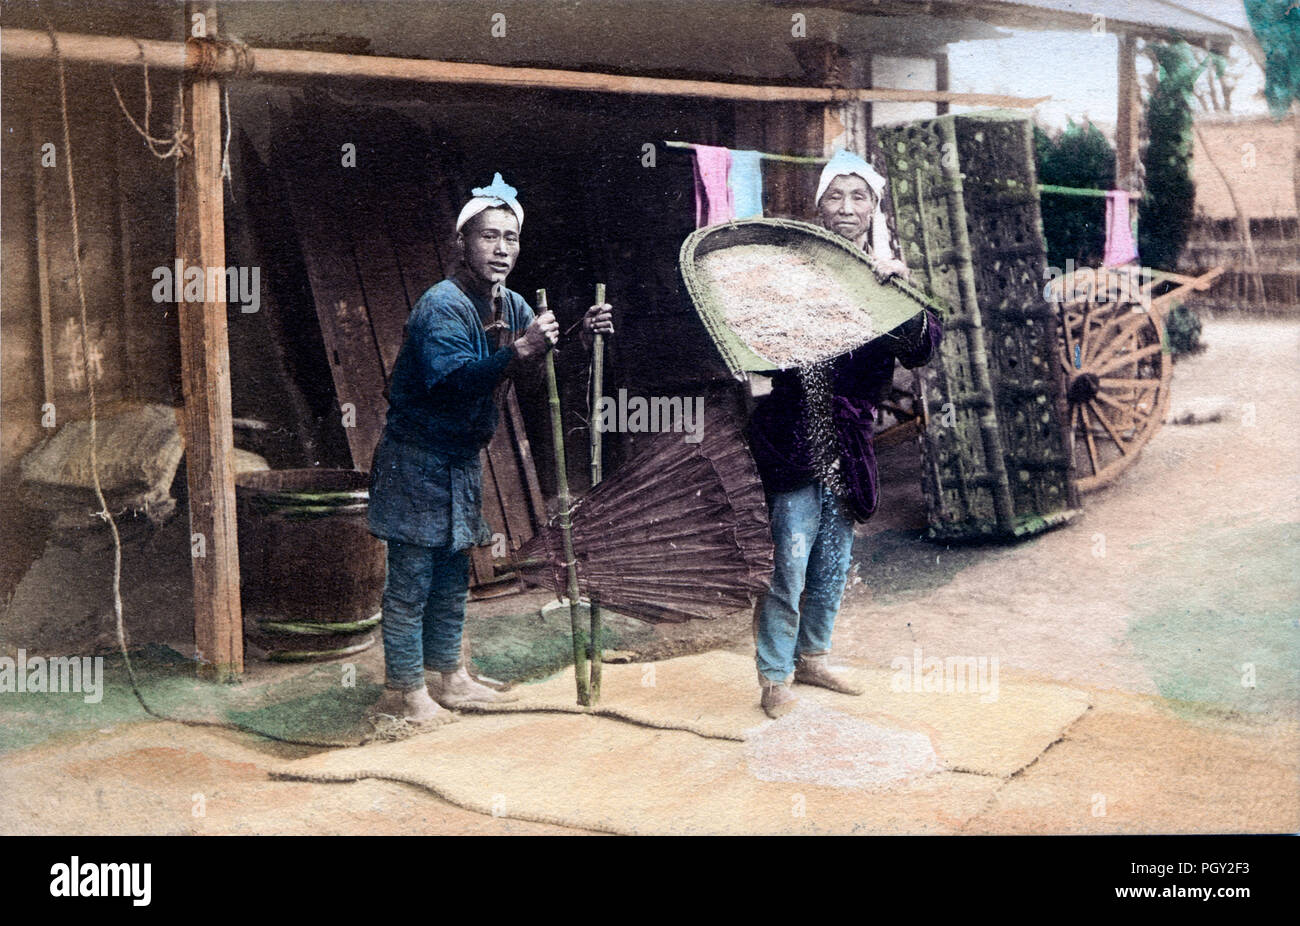 [ 1910s Japan - Two Farmers Threshing Rice ] —  Two farmers thresh rice using large fans attached to bamboo poles. The wind produced by the fans aids in removing the the rice from its hull.   20th century vintage postcard. Stock Photo